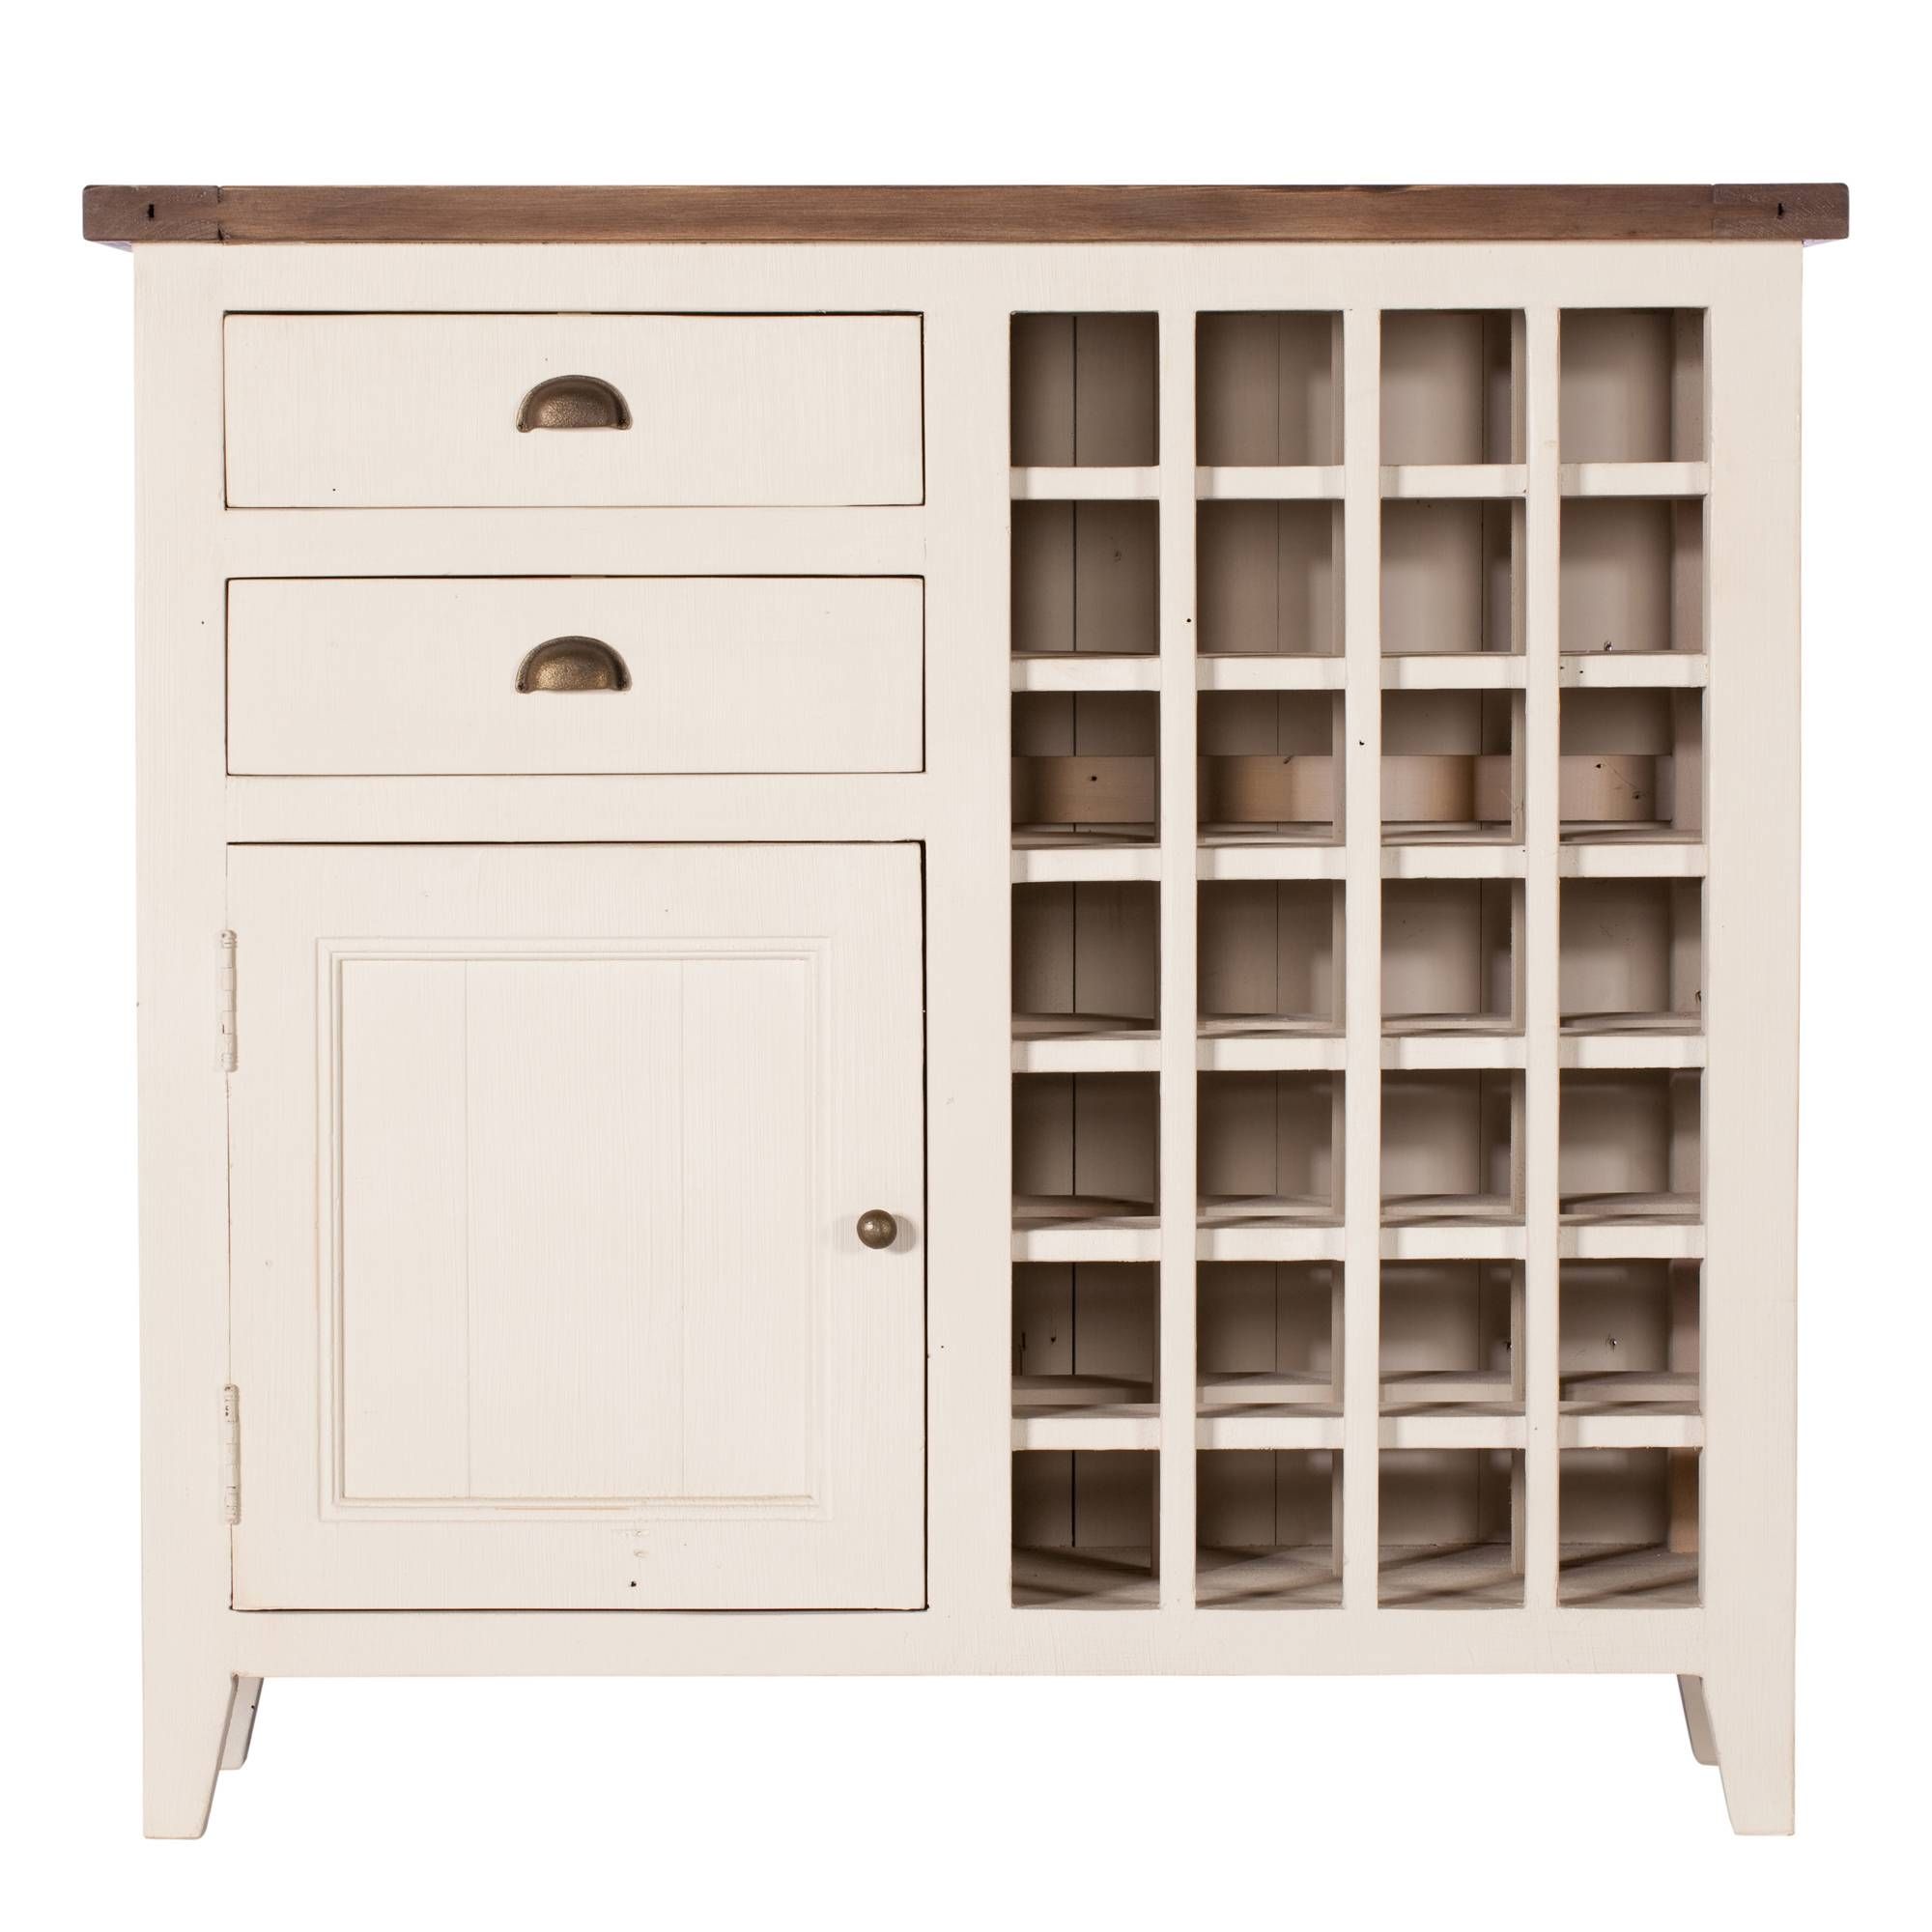 Aldeburgh Wine Rack Sideboard | No 44 Furniture, Cobham Nr London For Sideboards With Wine Racks (View 15 of 20)